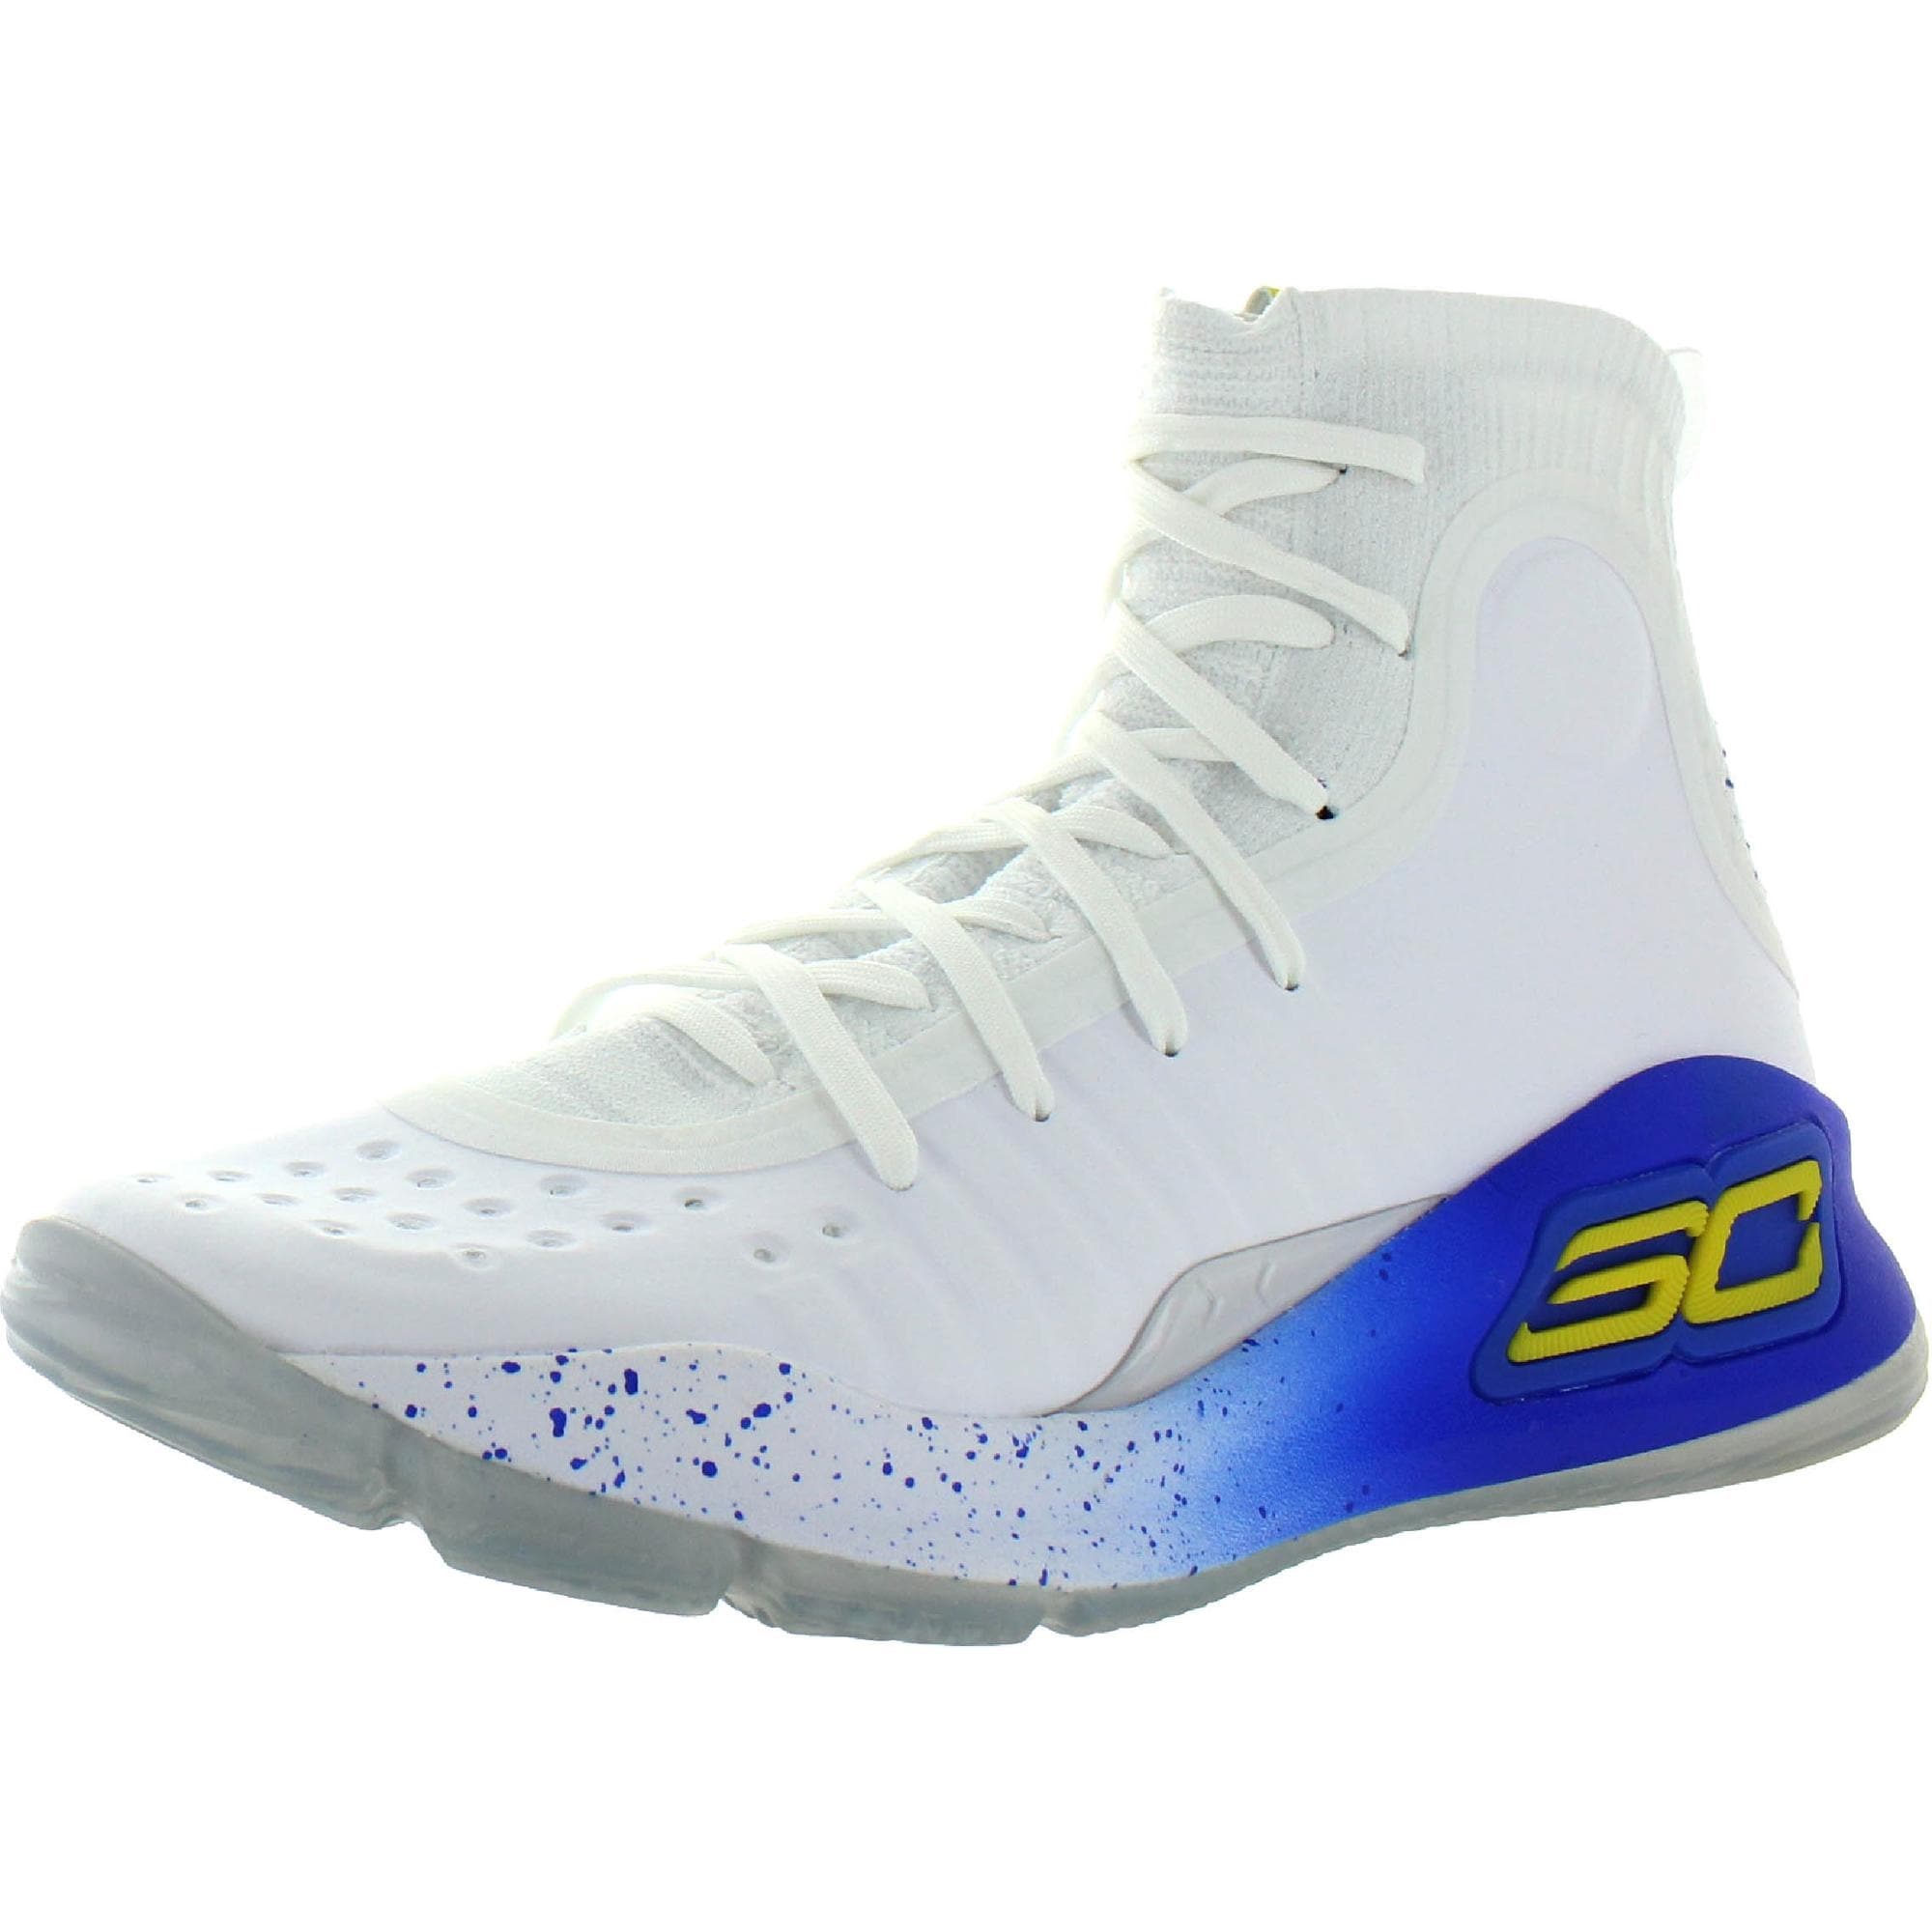 Curry 4 Basketball Shoes Online Sale 